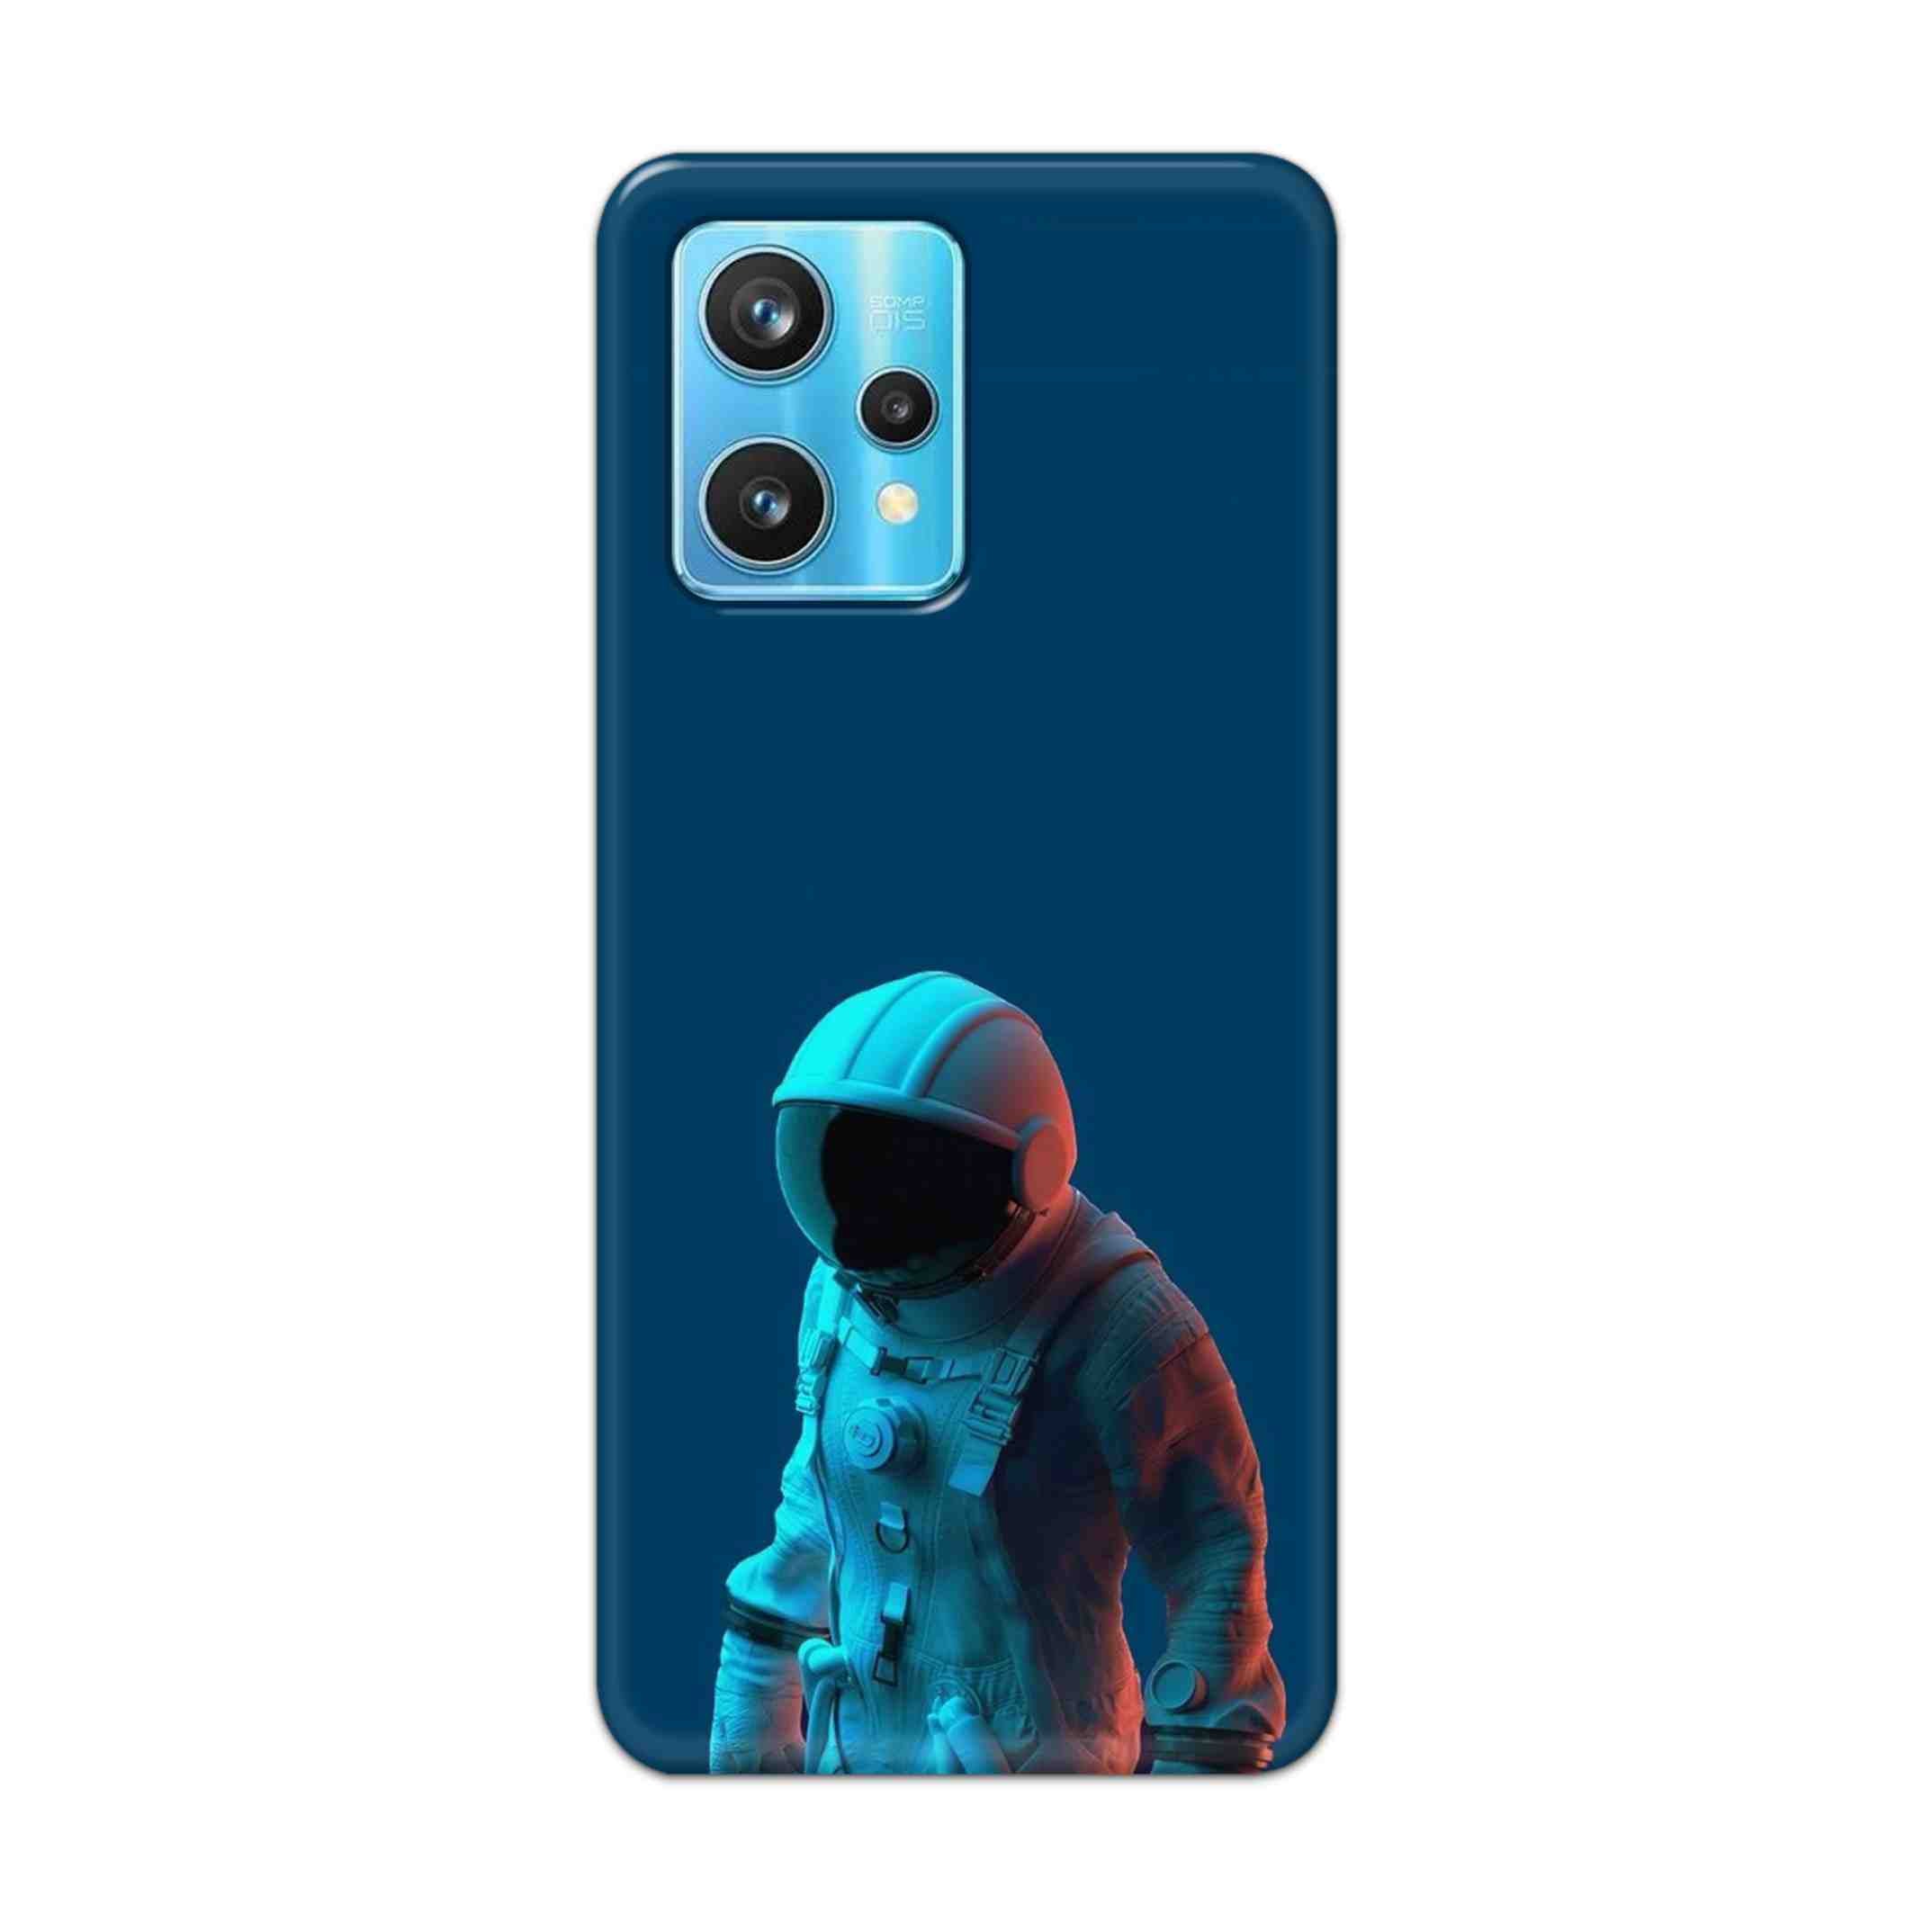 Buy Blue Astronaut Hard Back Mobile Phone Case Cover For Realme 9 Pro Plus Online